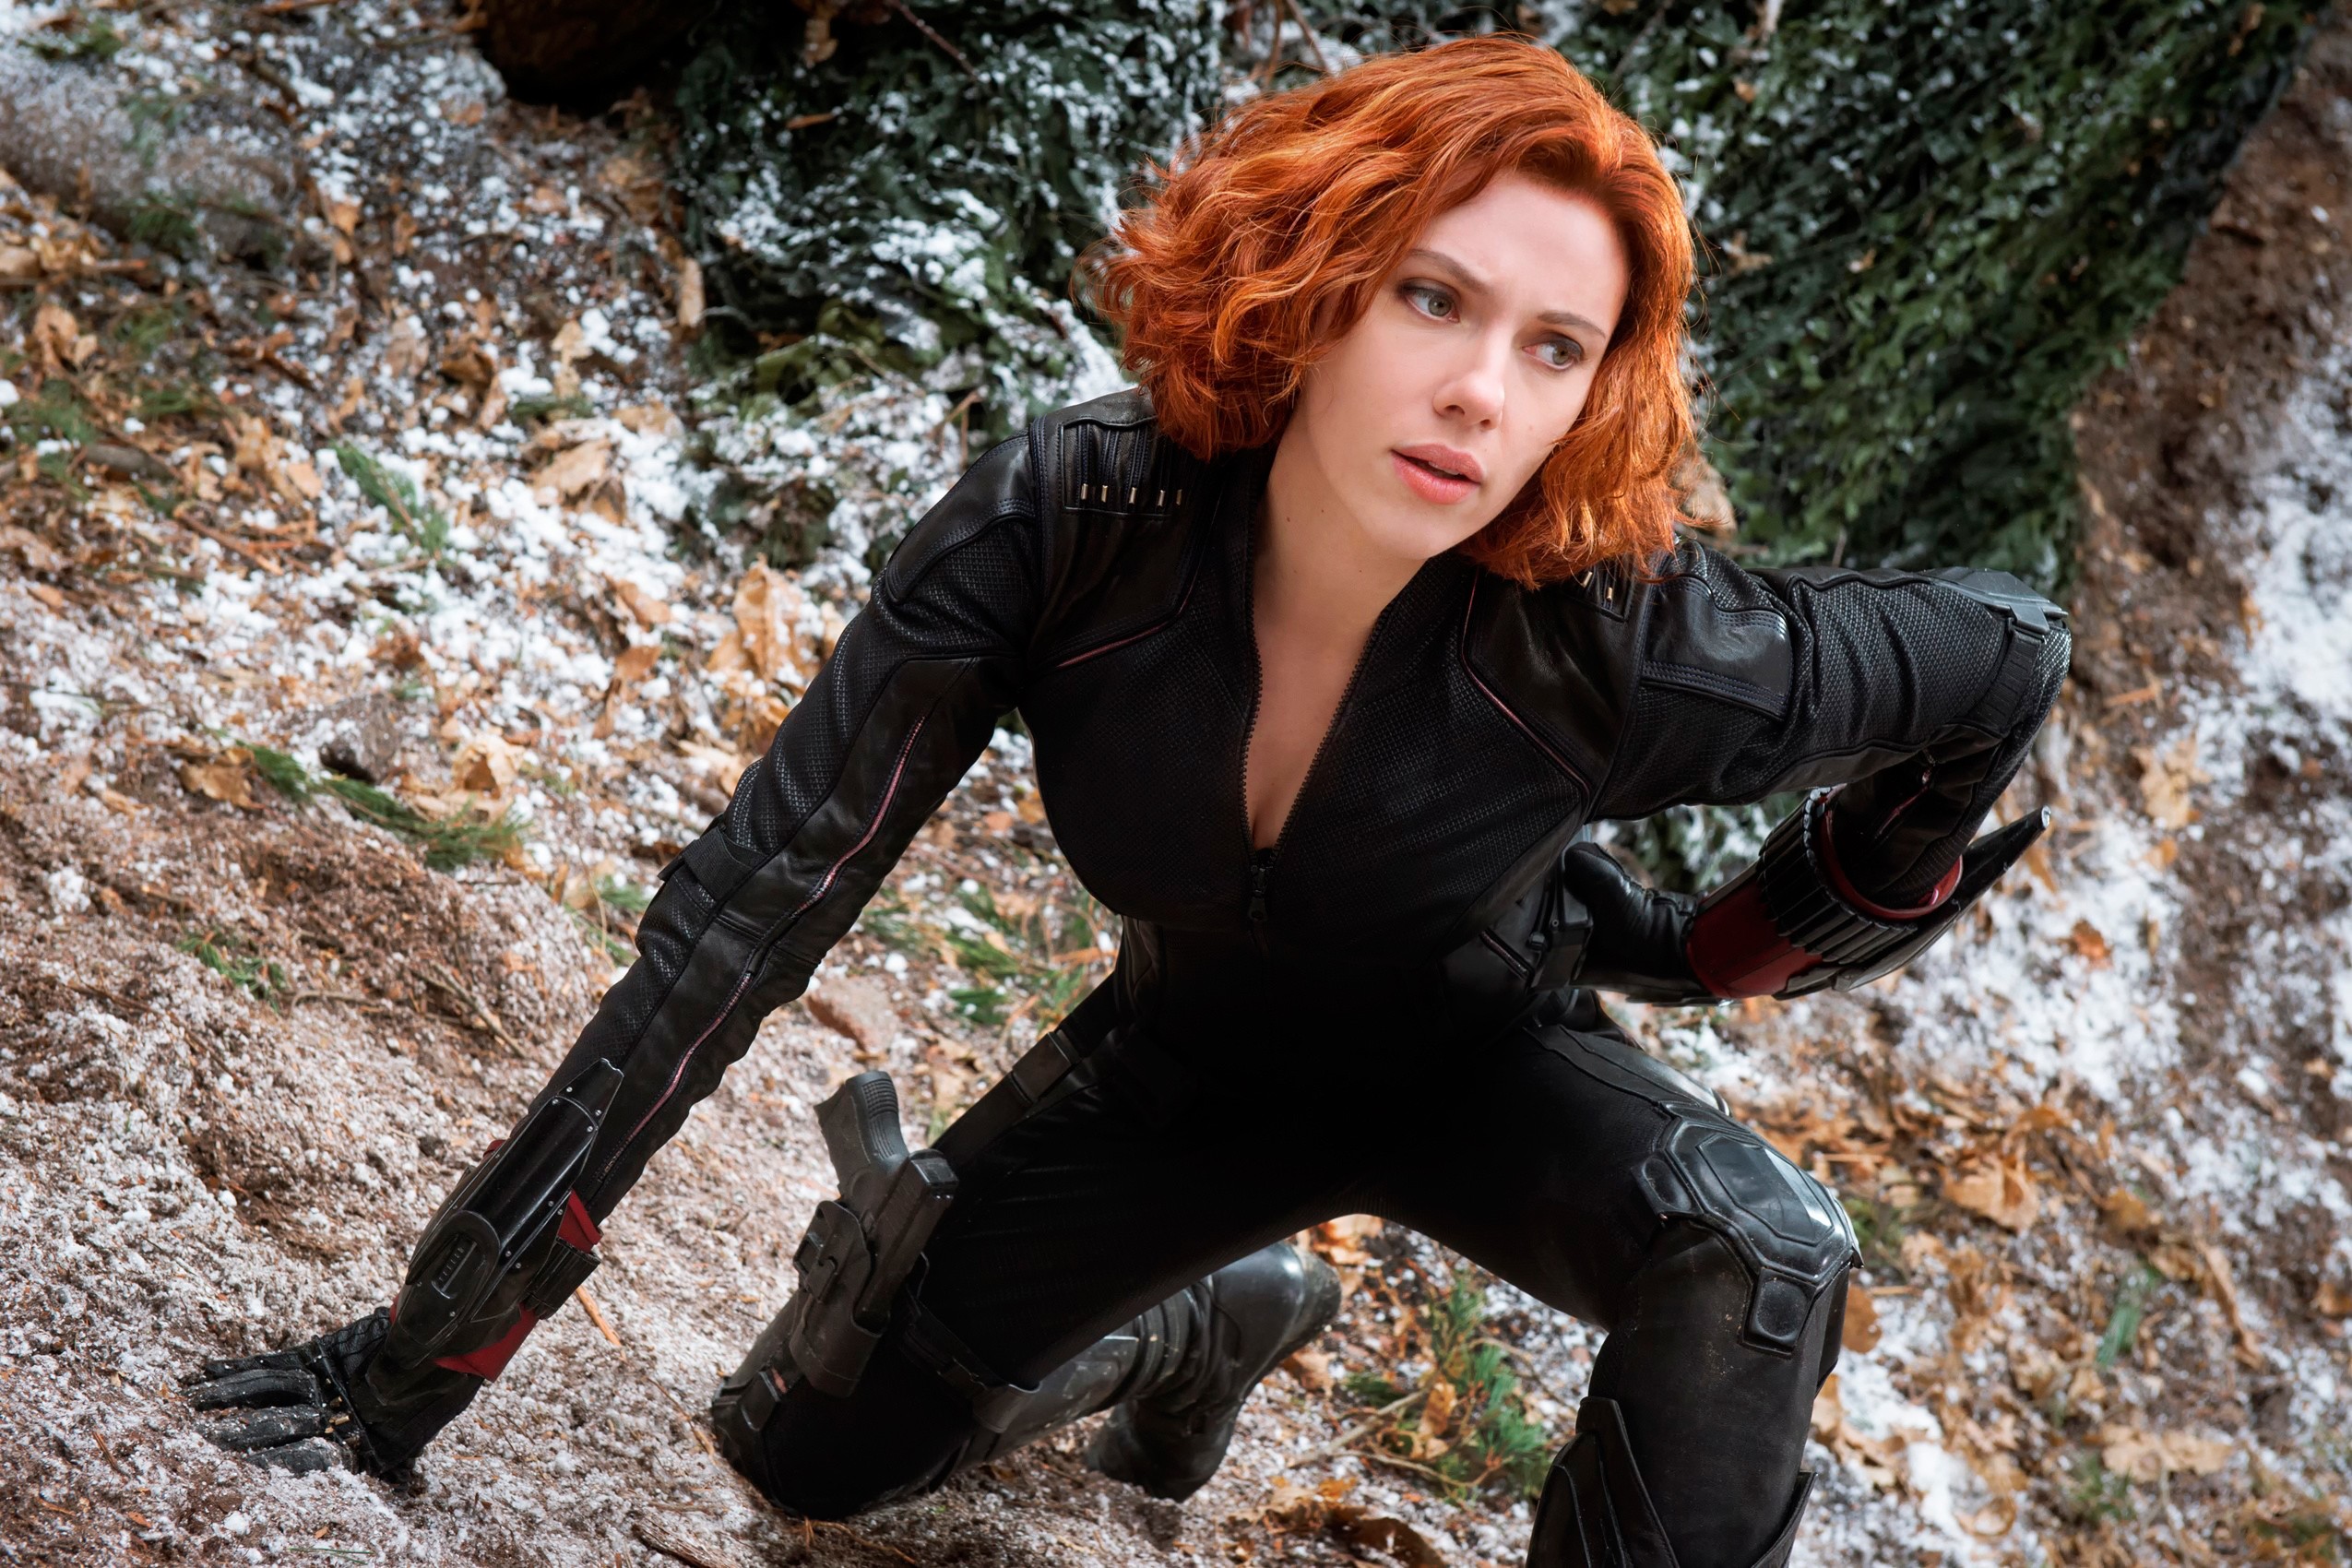 People 2550x1700 Scarlett Johansson Black Widow The Avengers Avengers: Age of Ultron women actress movies dyed hair redhead Marvel Cinematic Universe